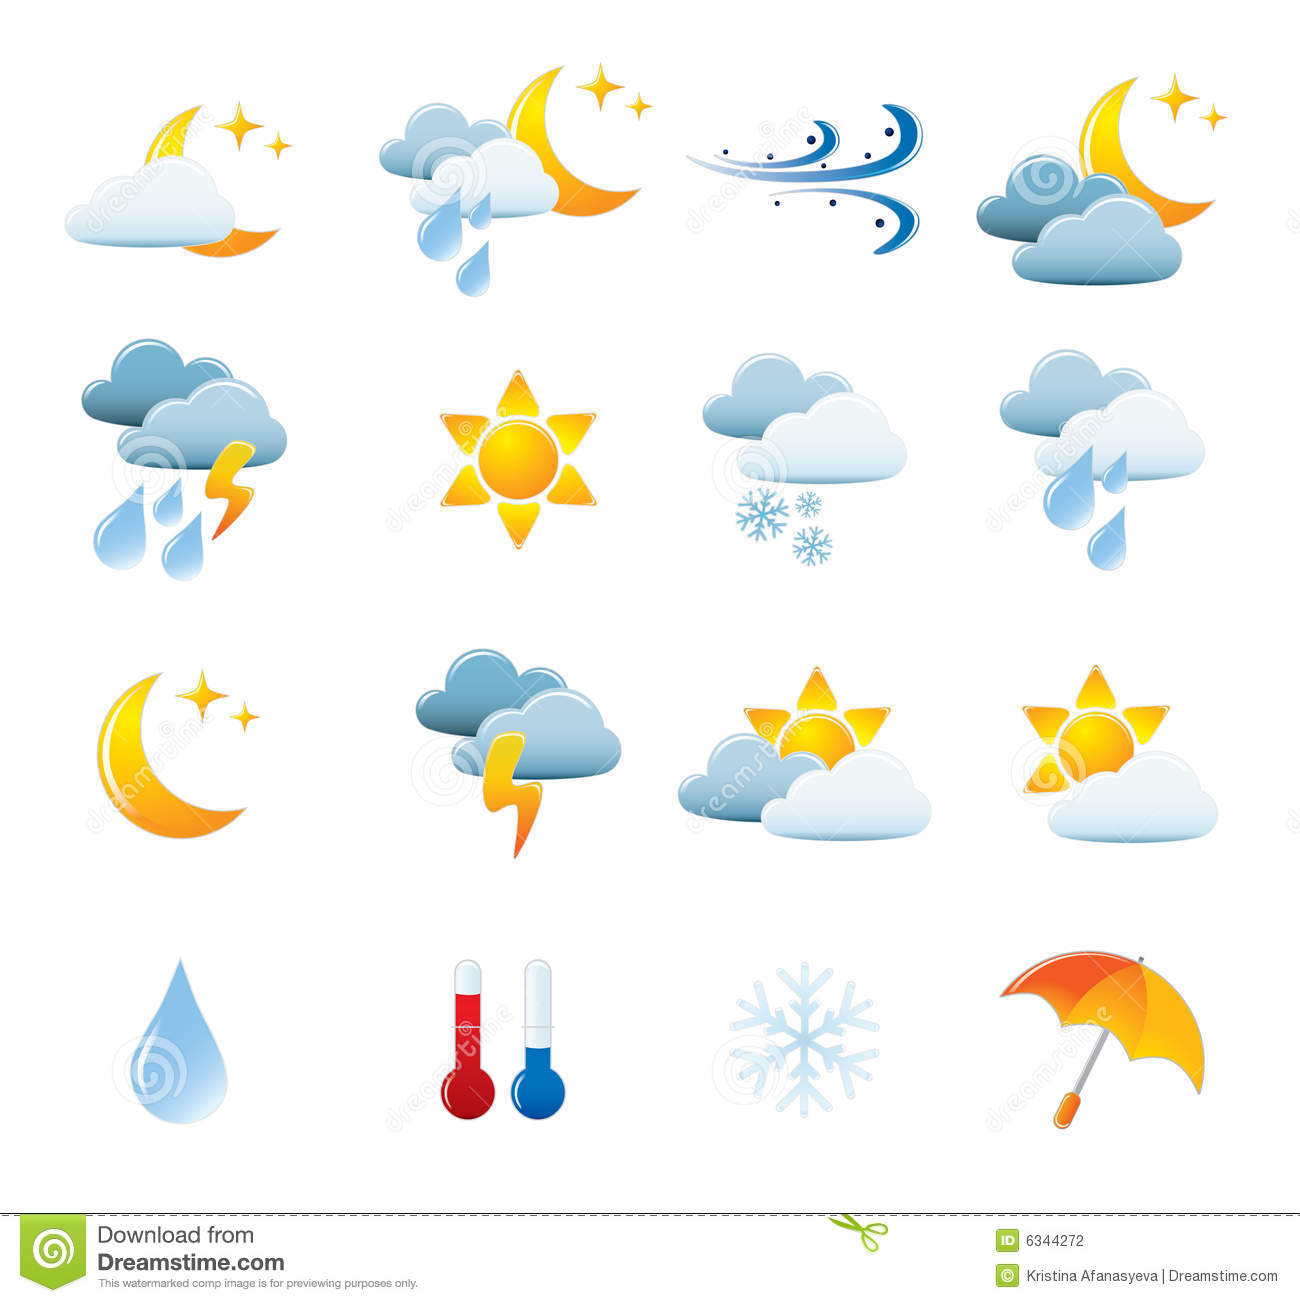 9 Time And Temperature Icon Images